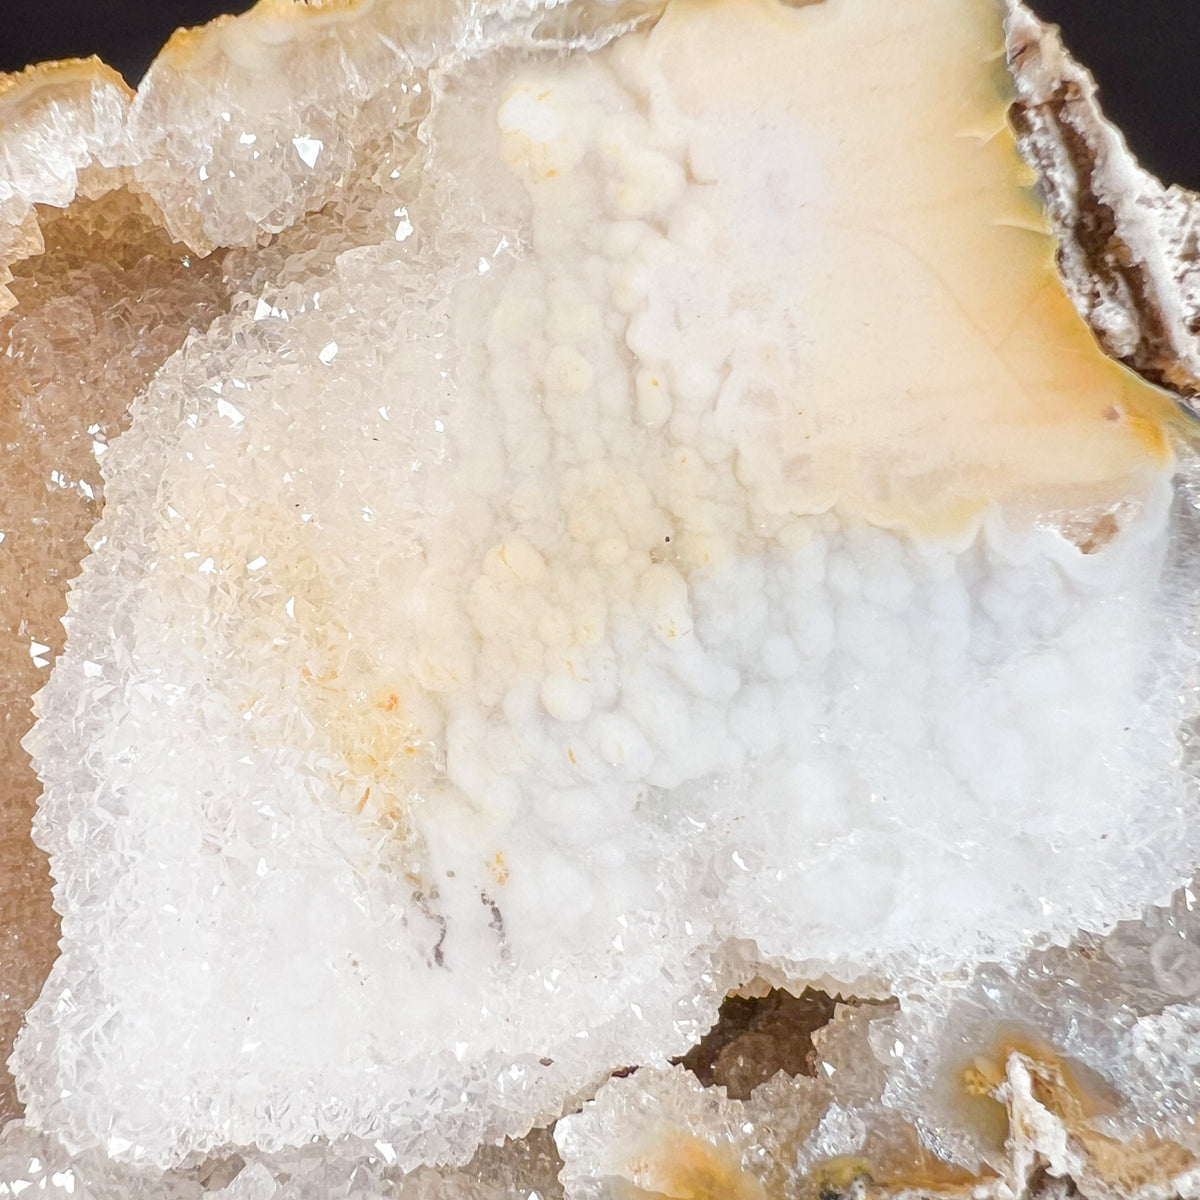 Chalcedony Inside Fossilized Coral